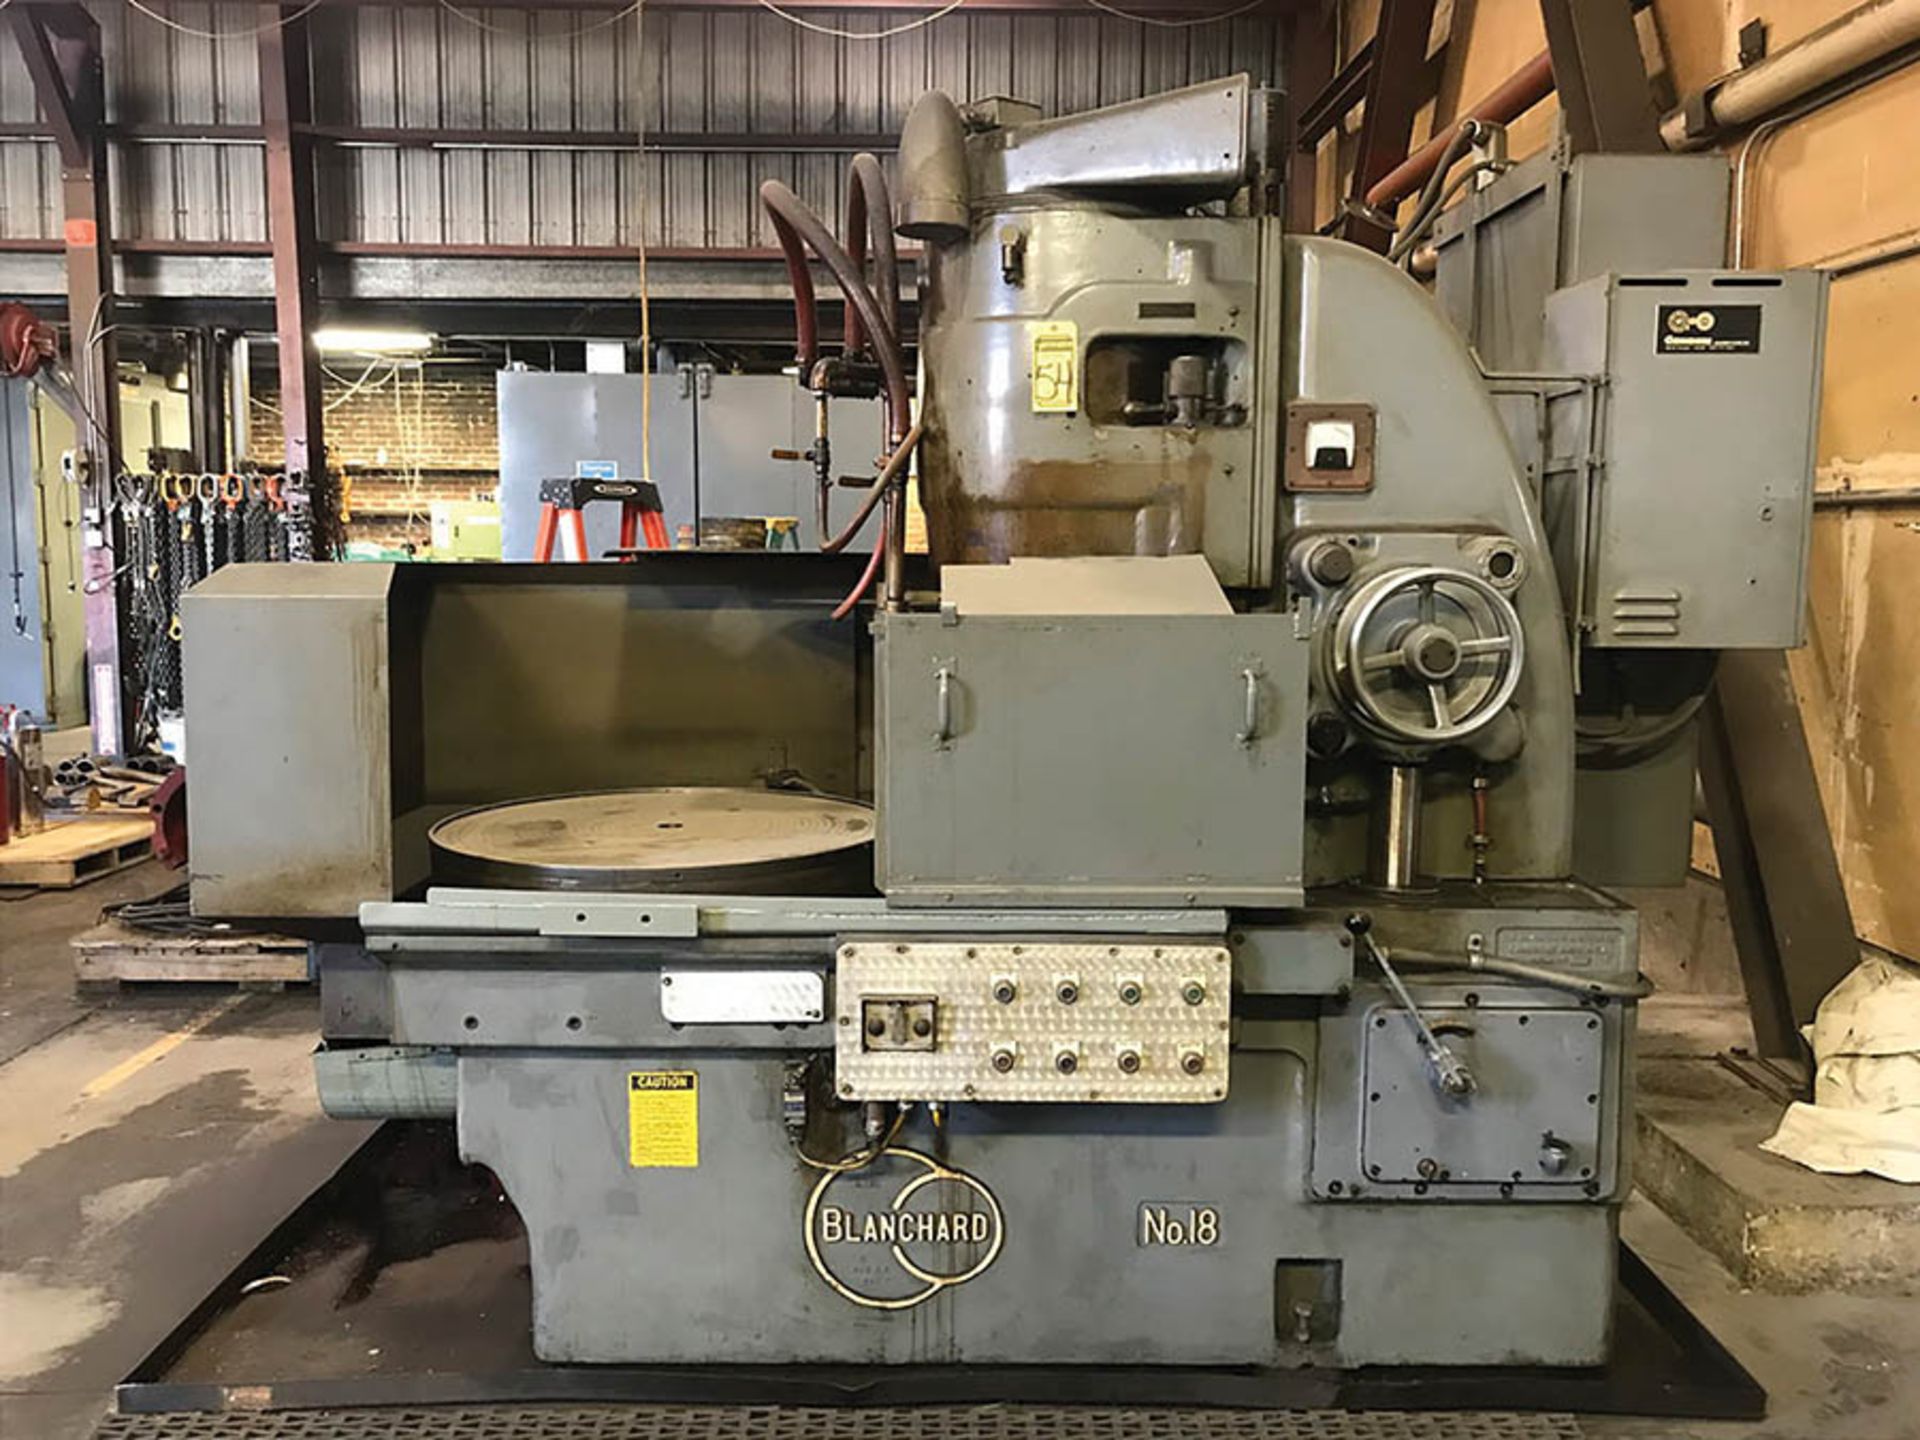 BLANCHARD 18'' ROTARY SURFACE GRINDER, MODEL NO. 18, 36'' ELECTROMAGNETIC CHUCK, 720 MAX WHEEL